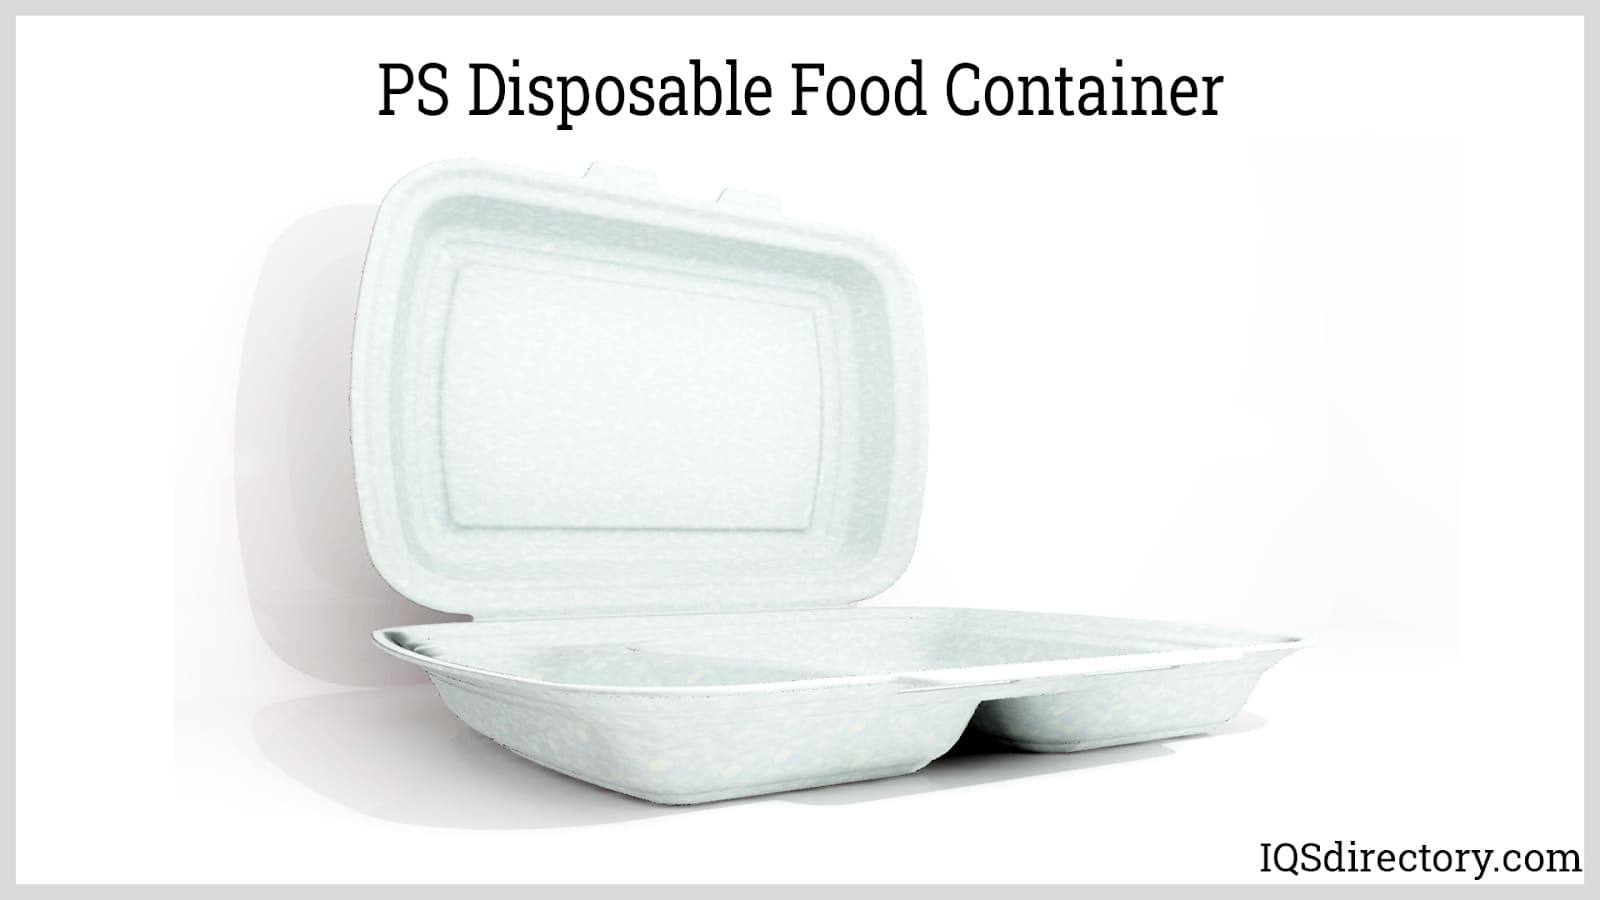 https://www.iqsdirectory.com/articles/plastic-container/ps-disposable-food-container.jpg